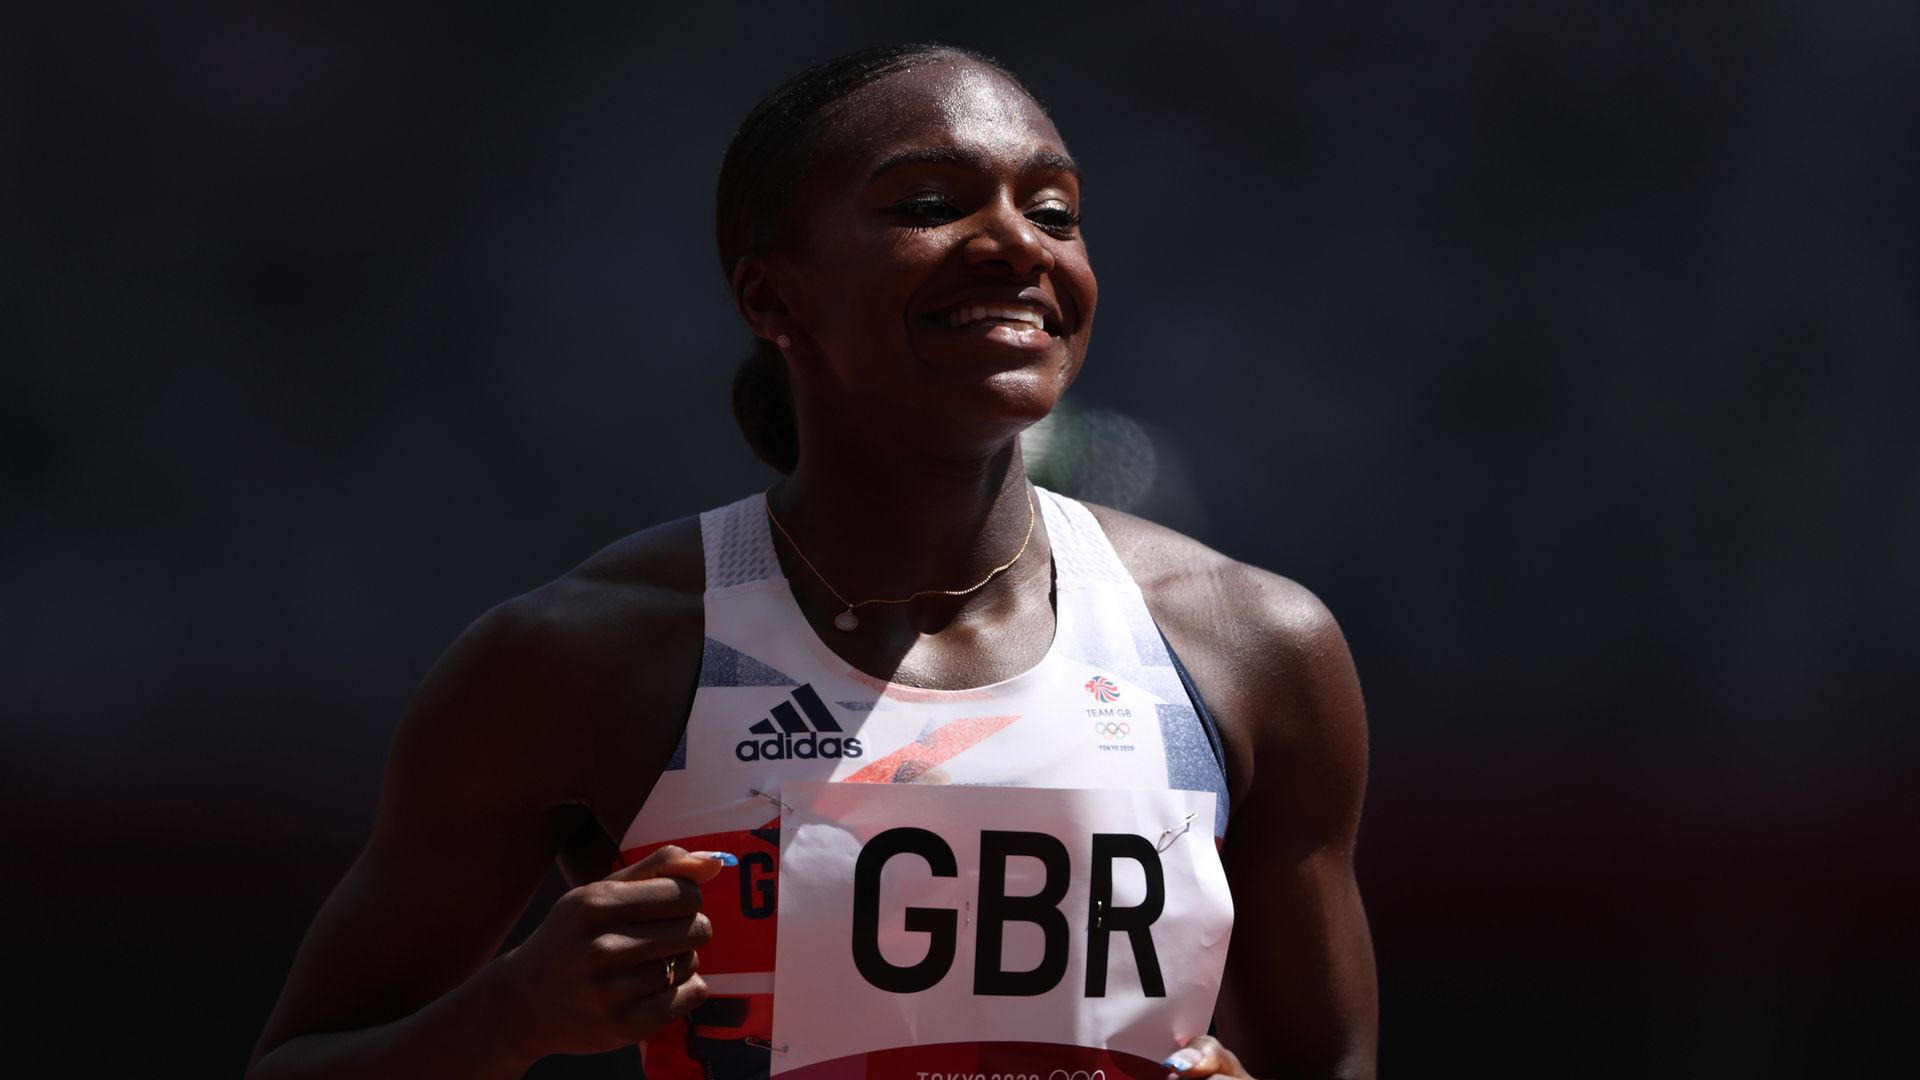 Asher-Smith helps 4x100m team deliver national record in heat